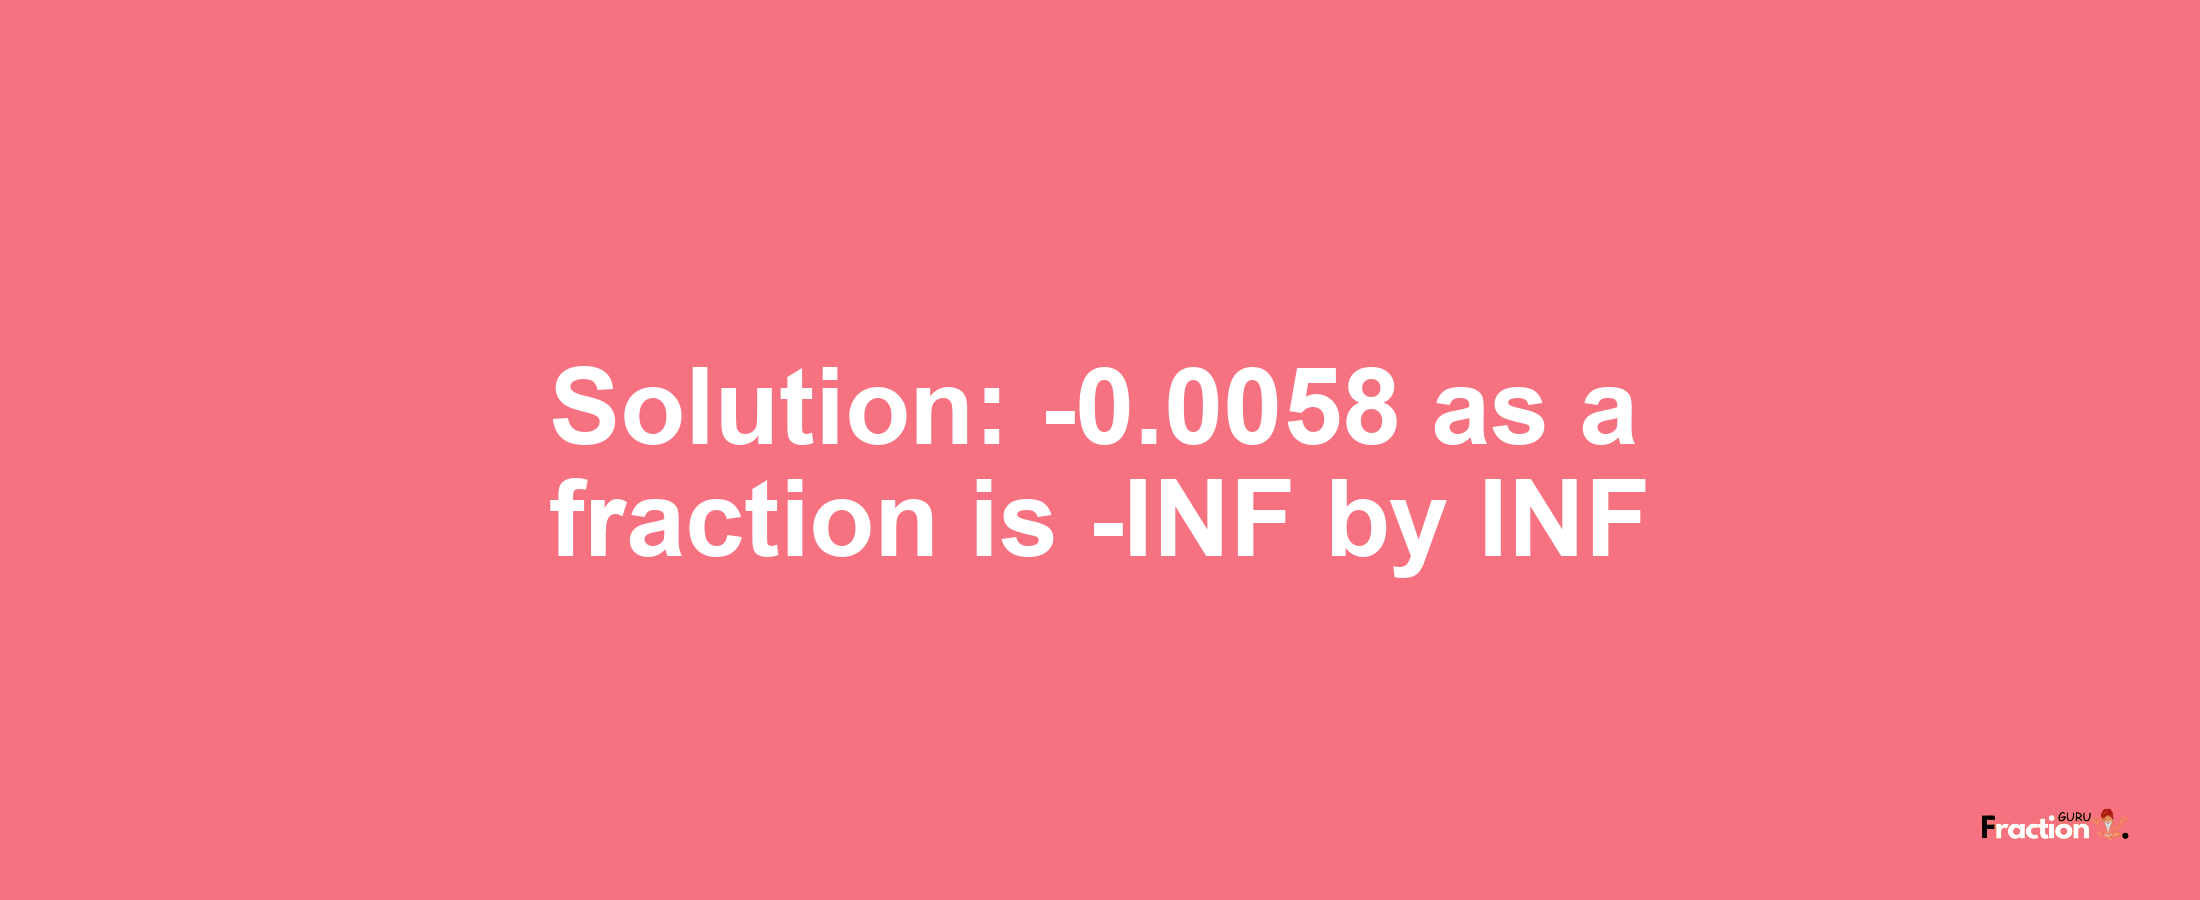 Solution:-0.0058 as a fraction is -INF/INF